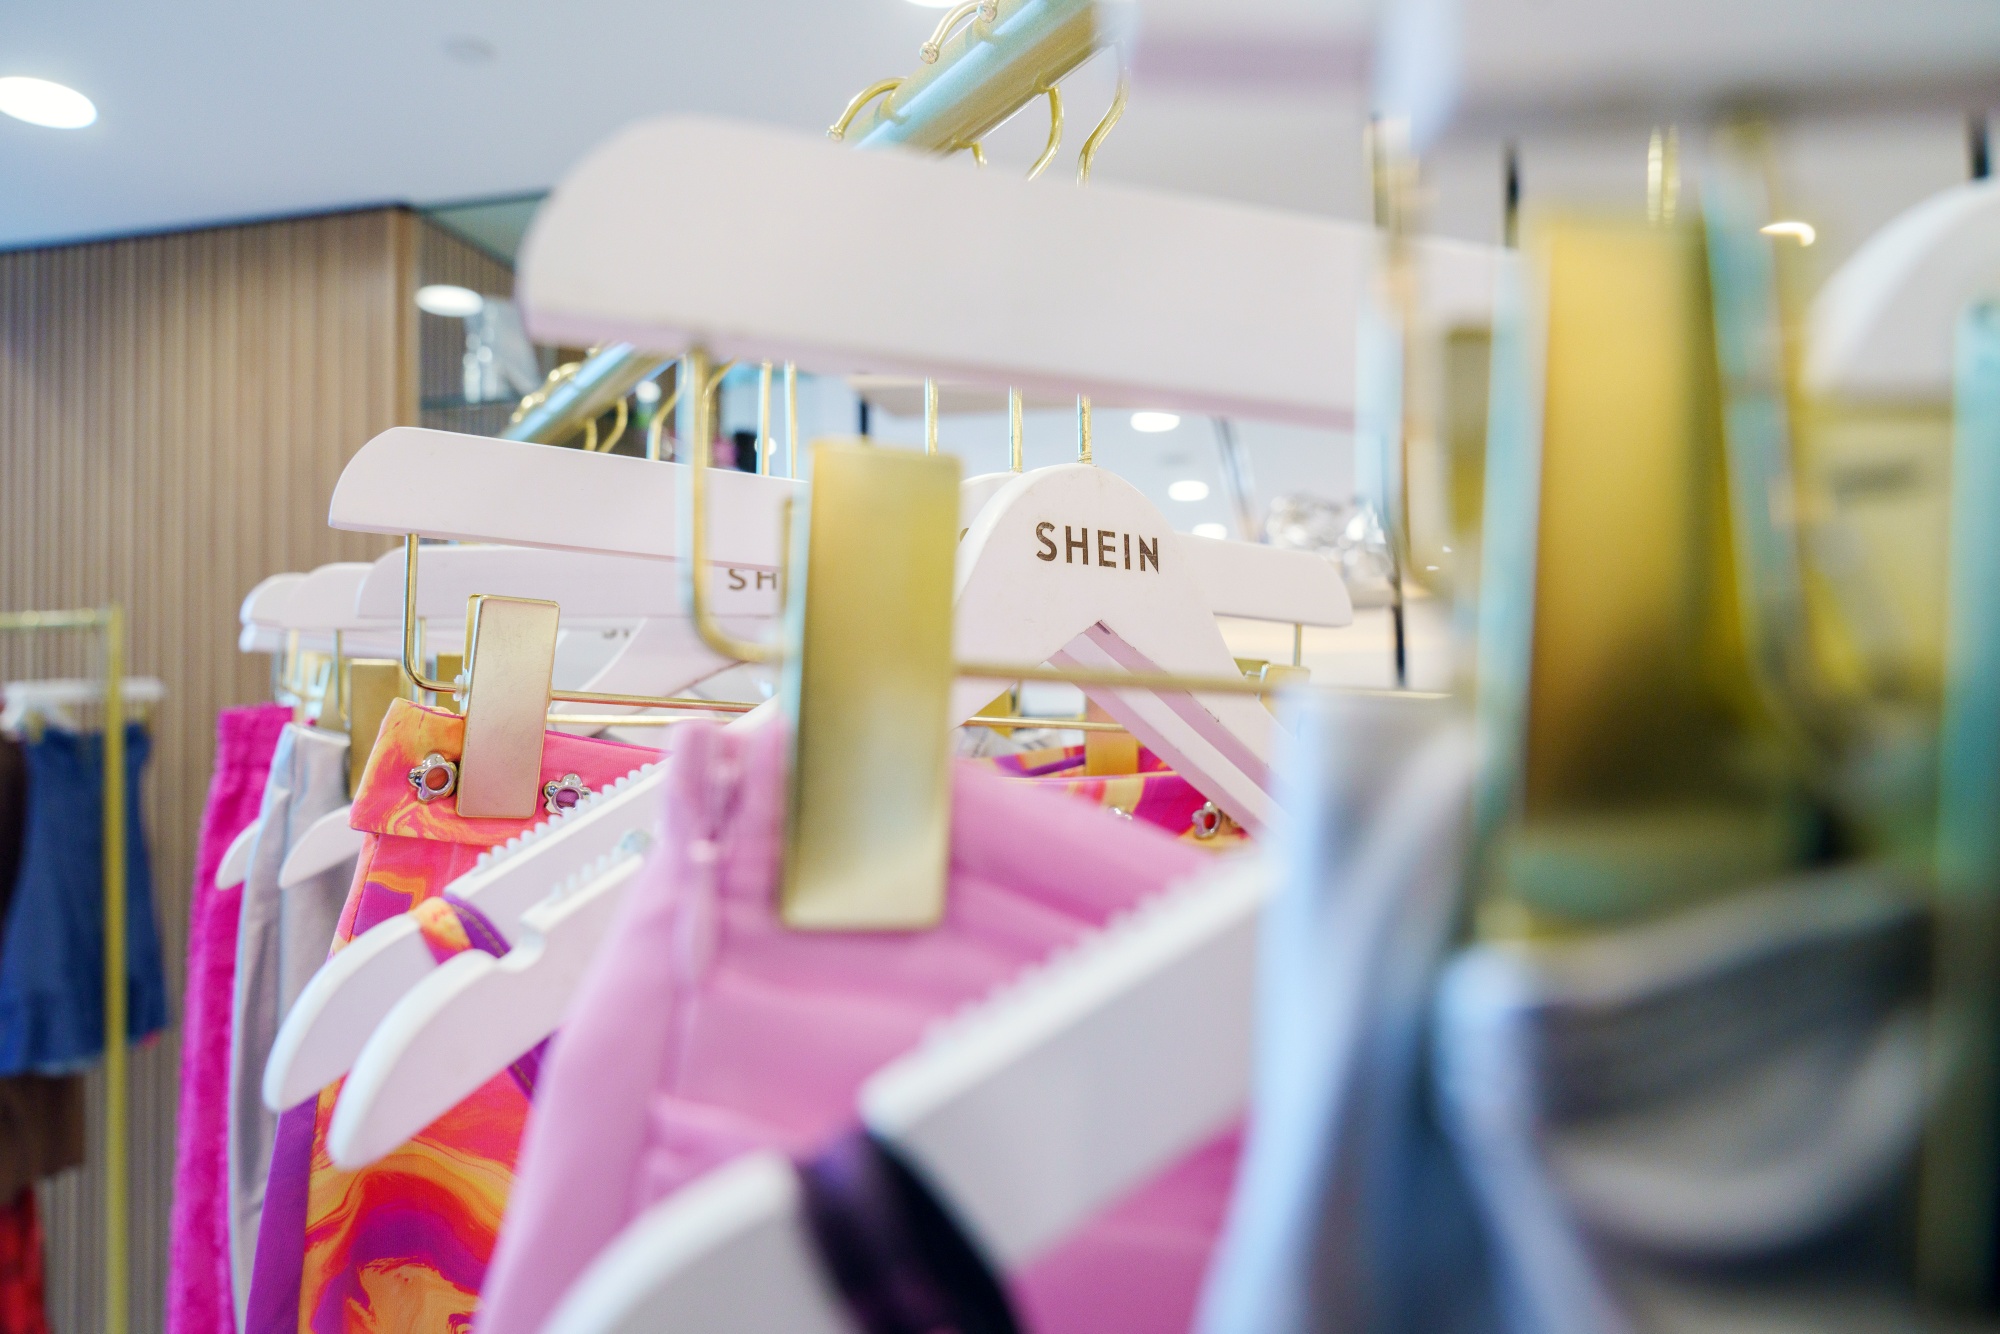 SHEIN Plans Canadian Expansion with Multiple Temporary Retail